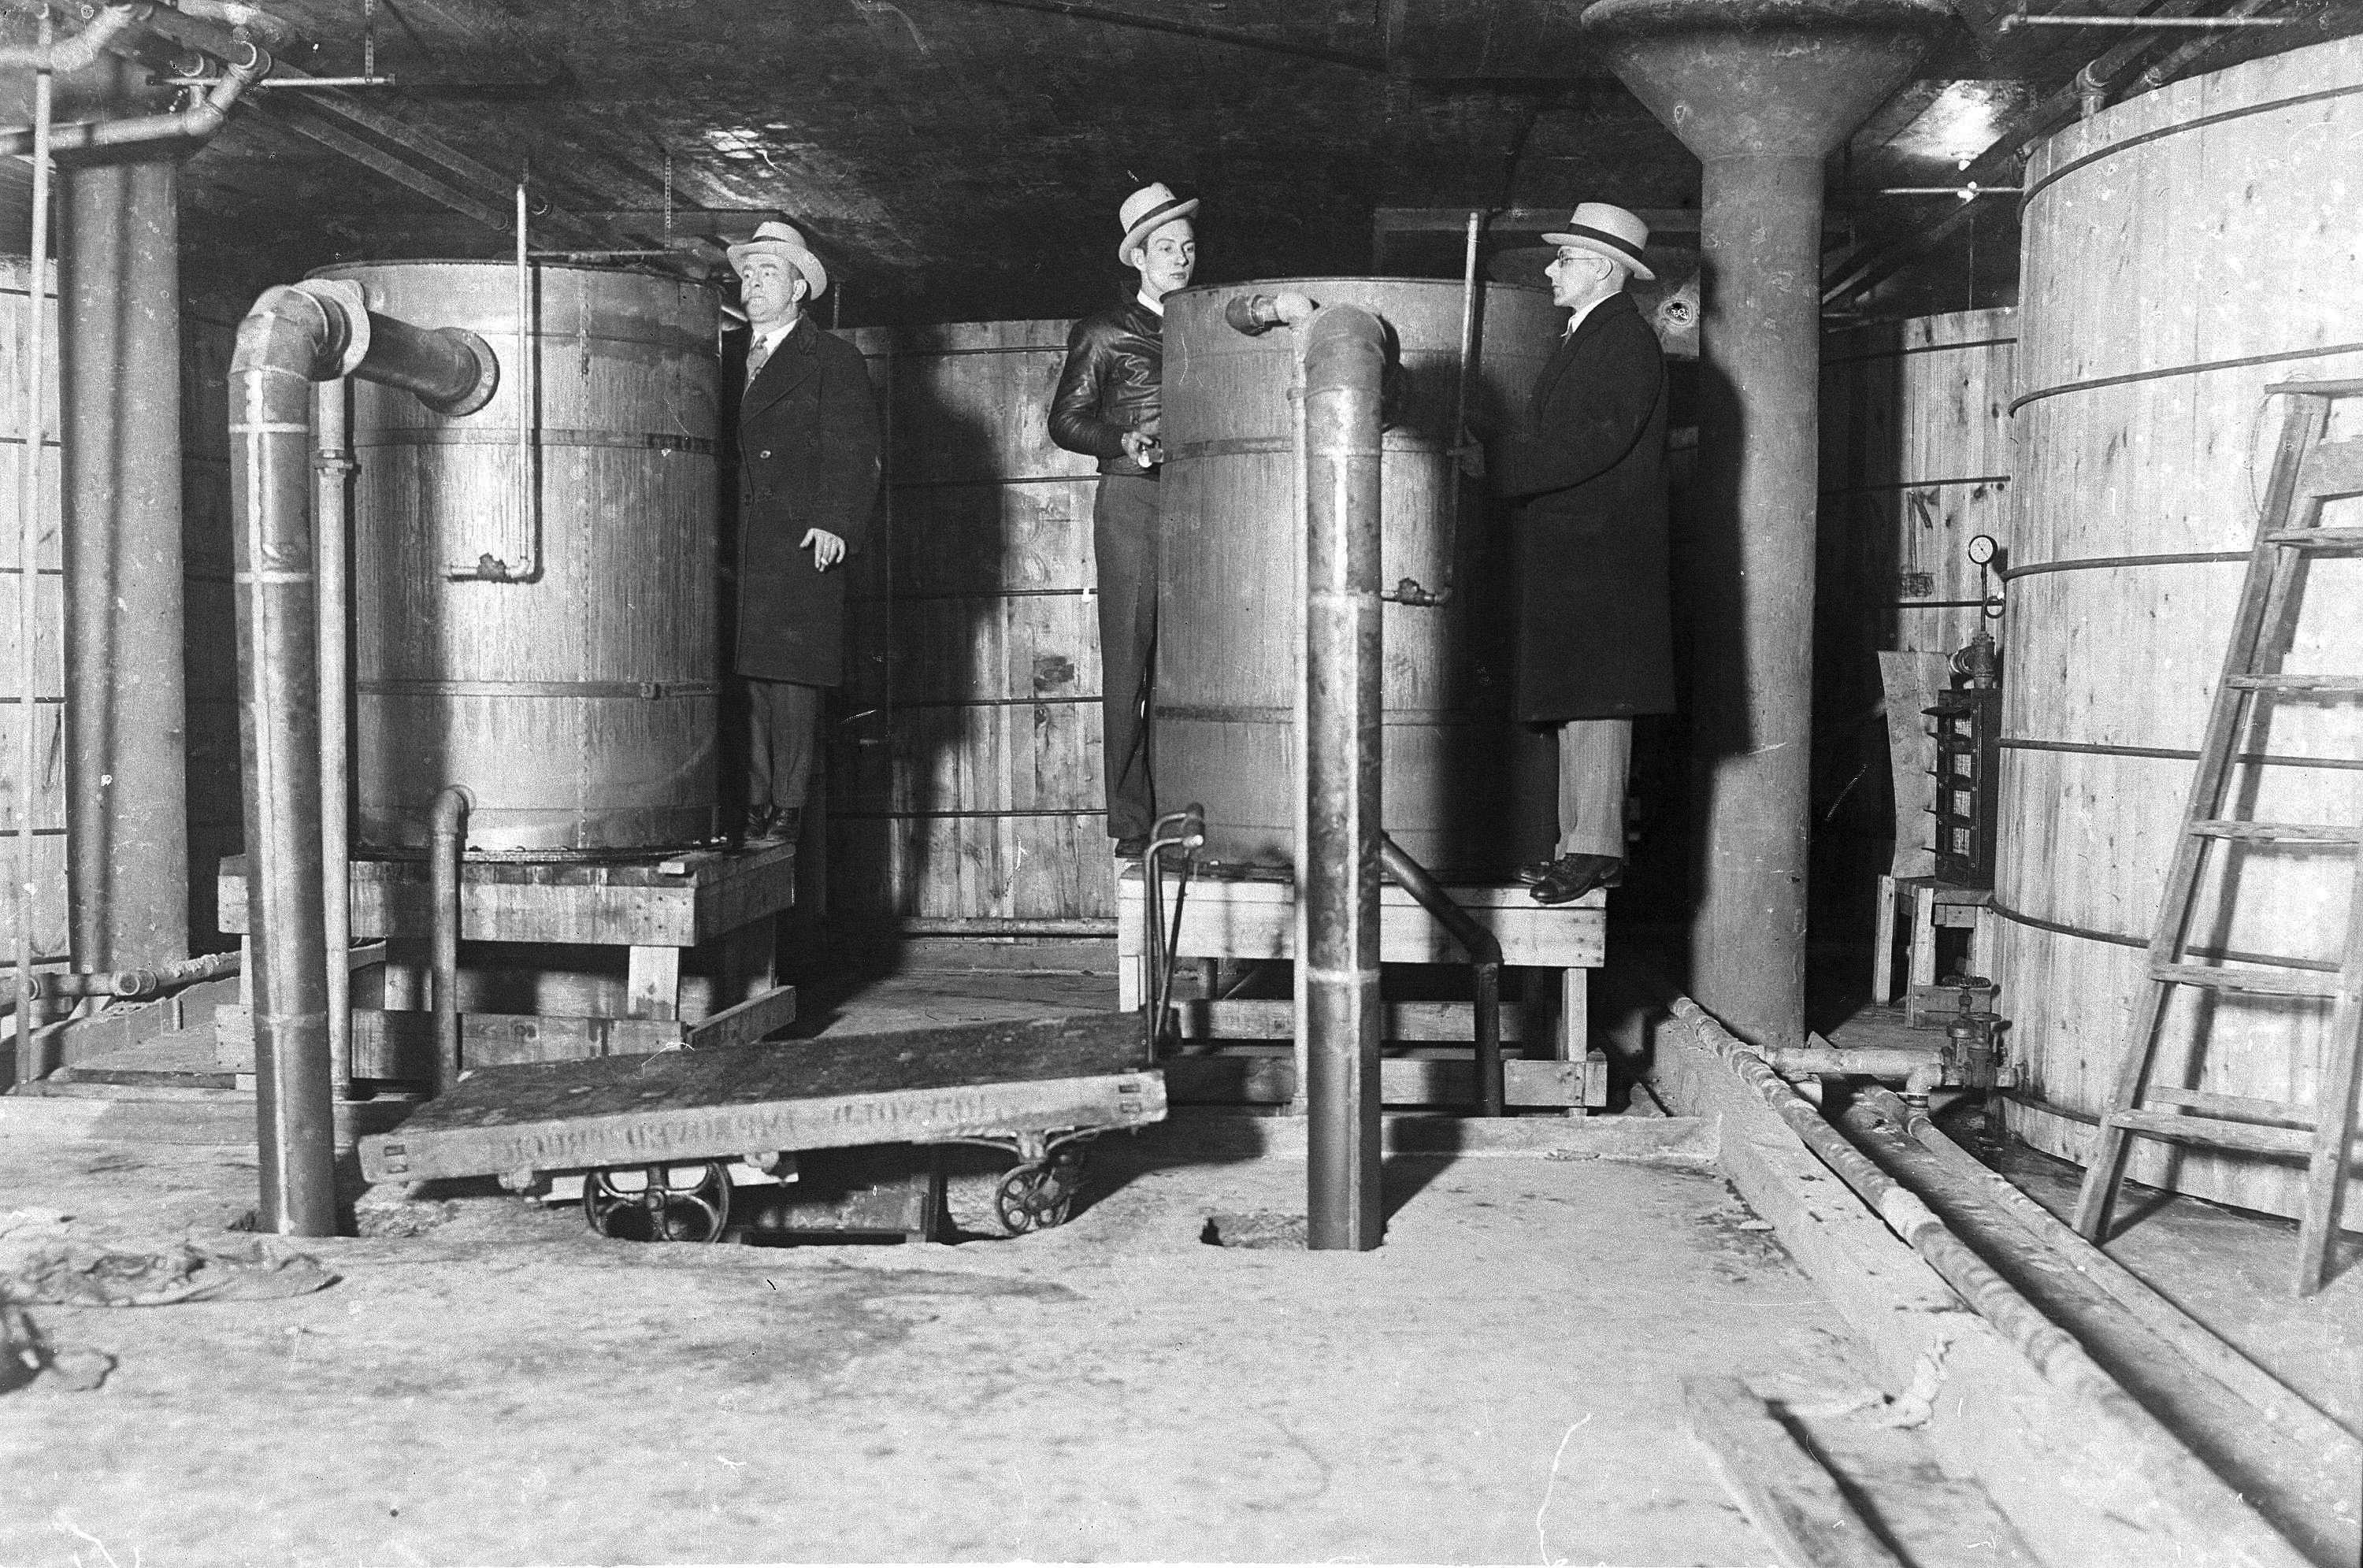 A black and white photo of three men in trench coats and fedoras next to big barrels.